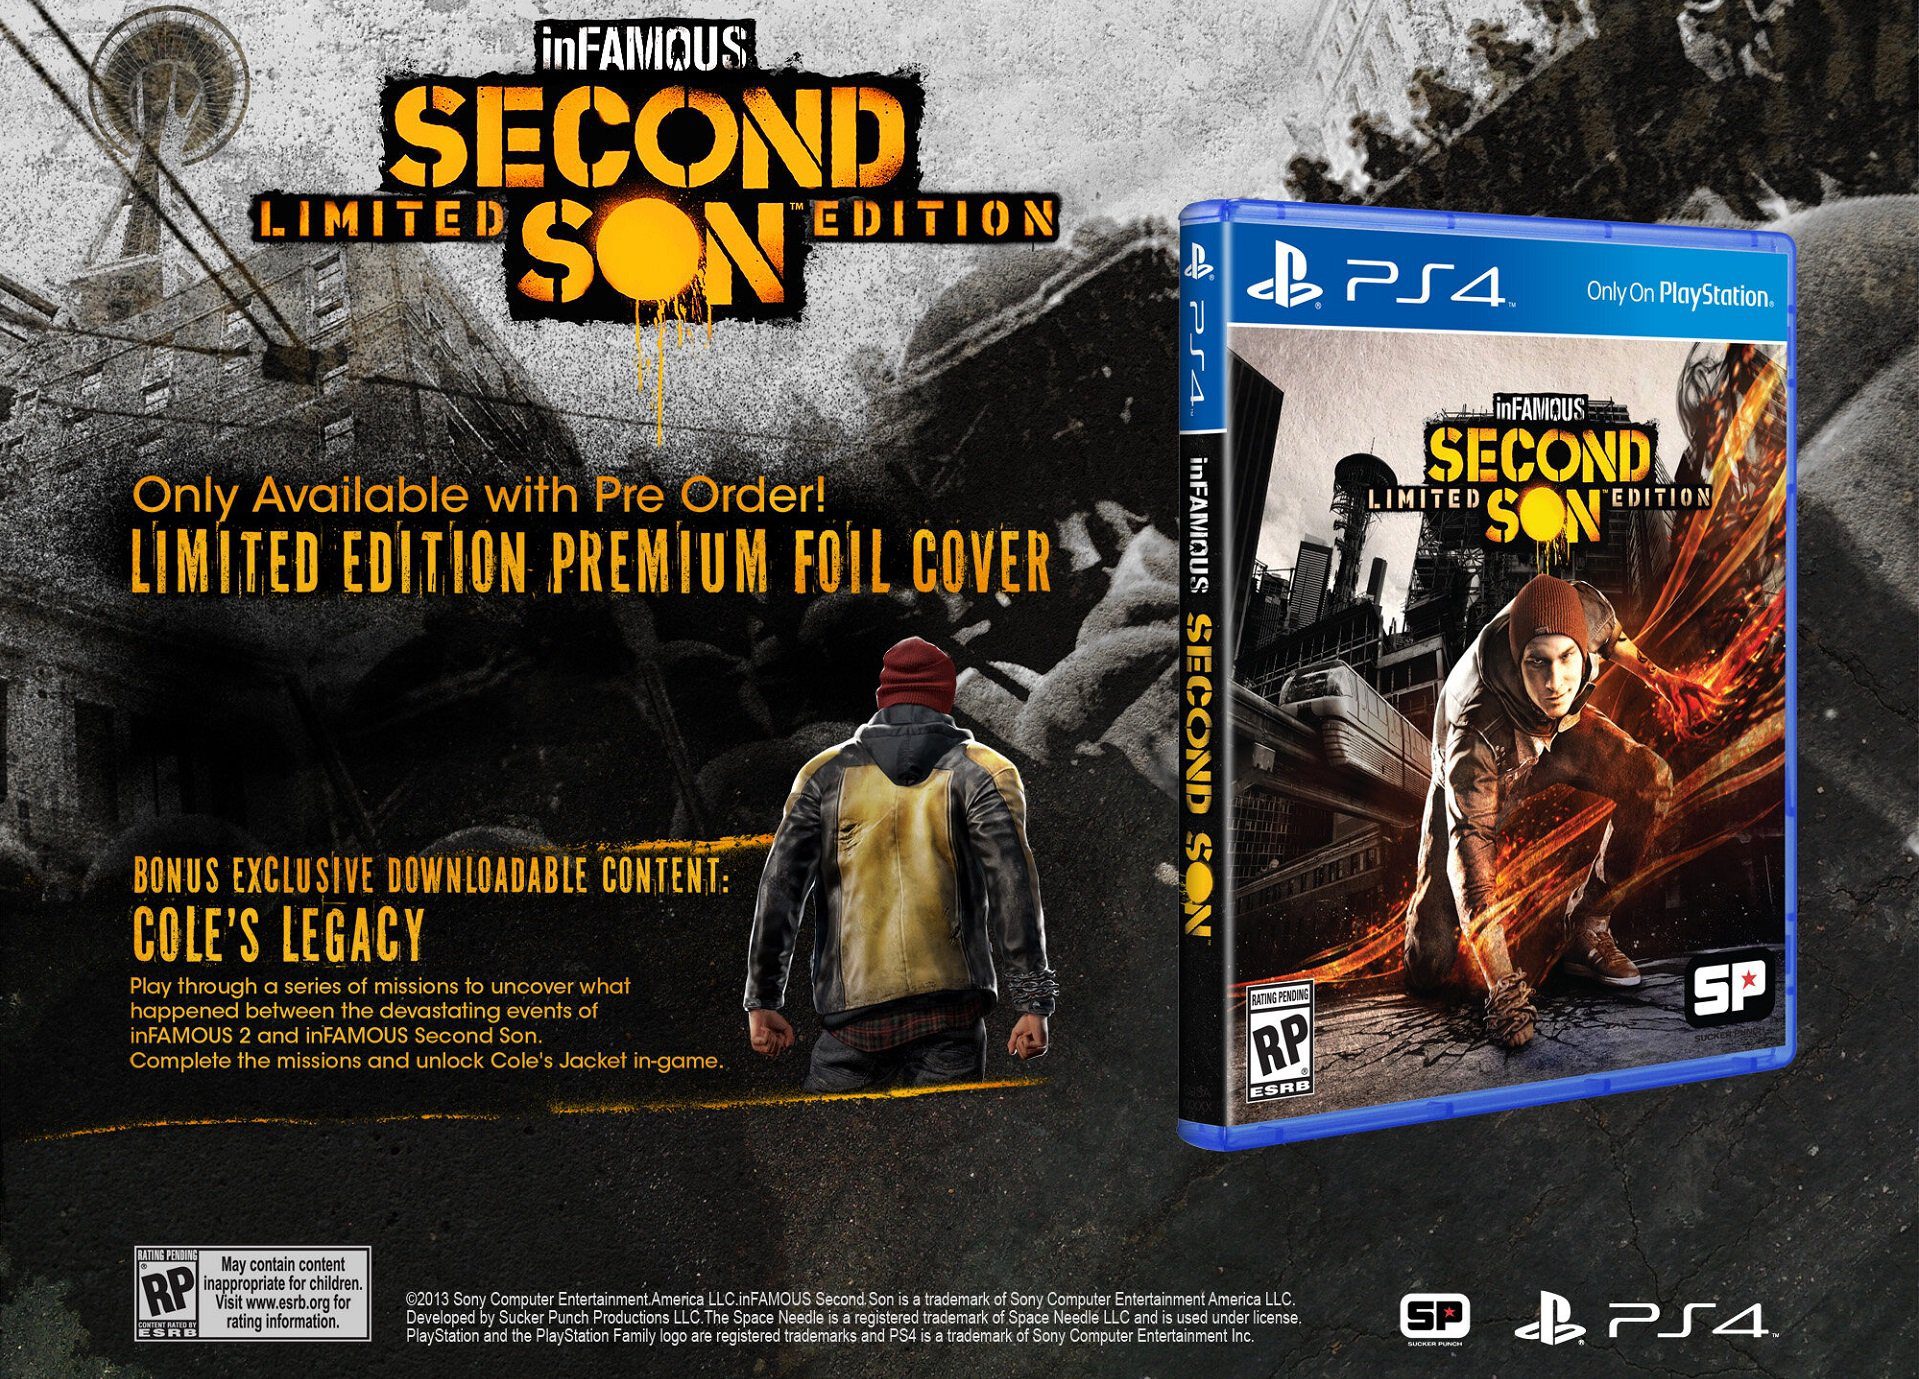 Manie slecht strand Infamous Second Son: Cole's Legacy DLC is now free on PS4 - Game Freaks 365